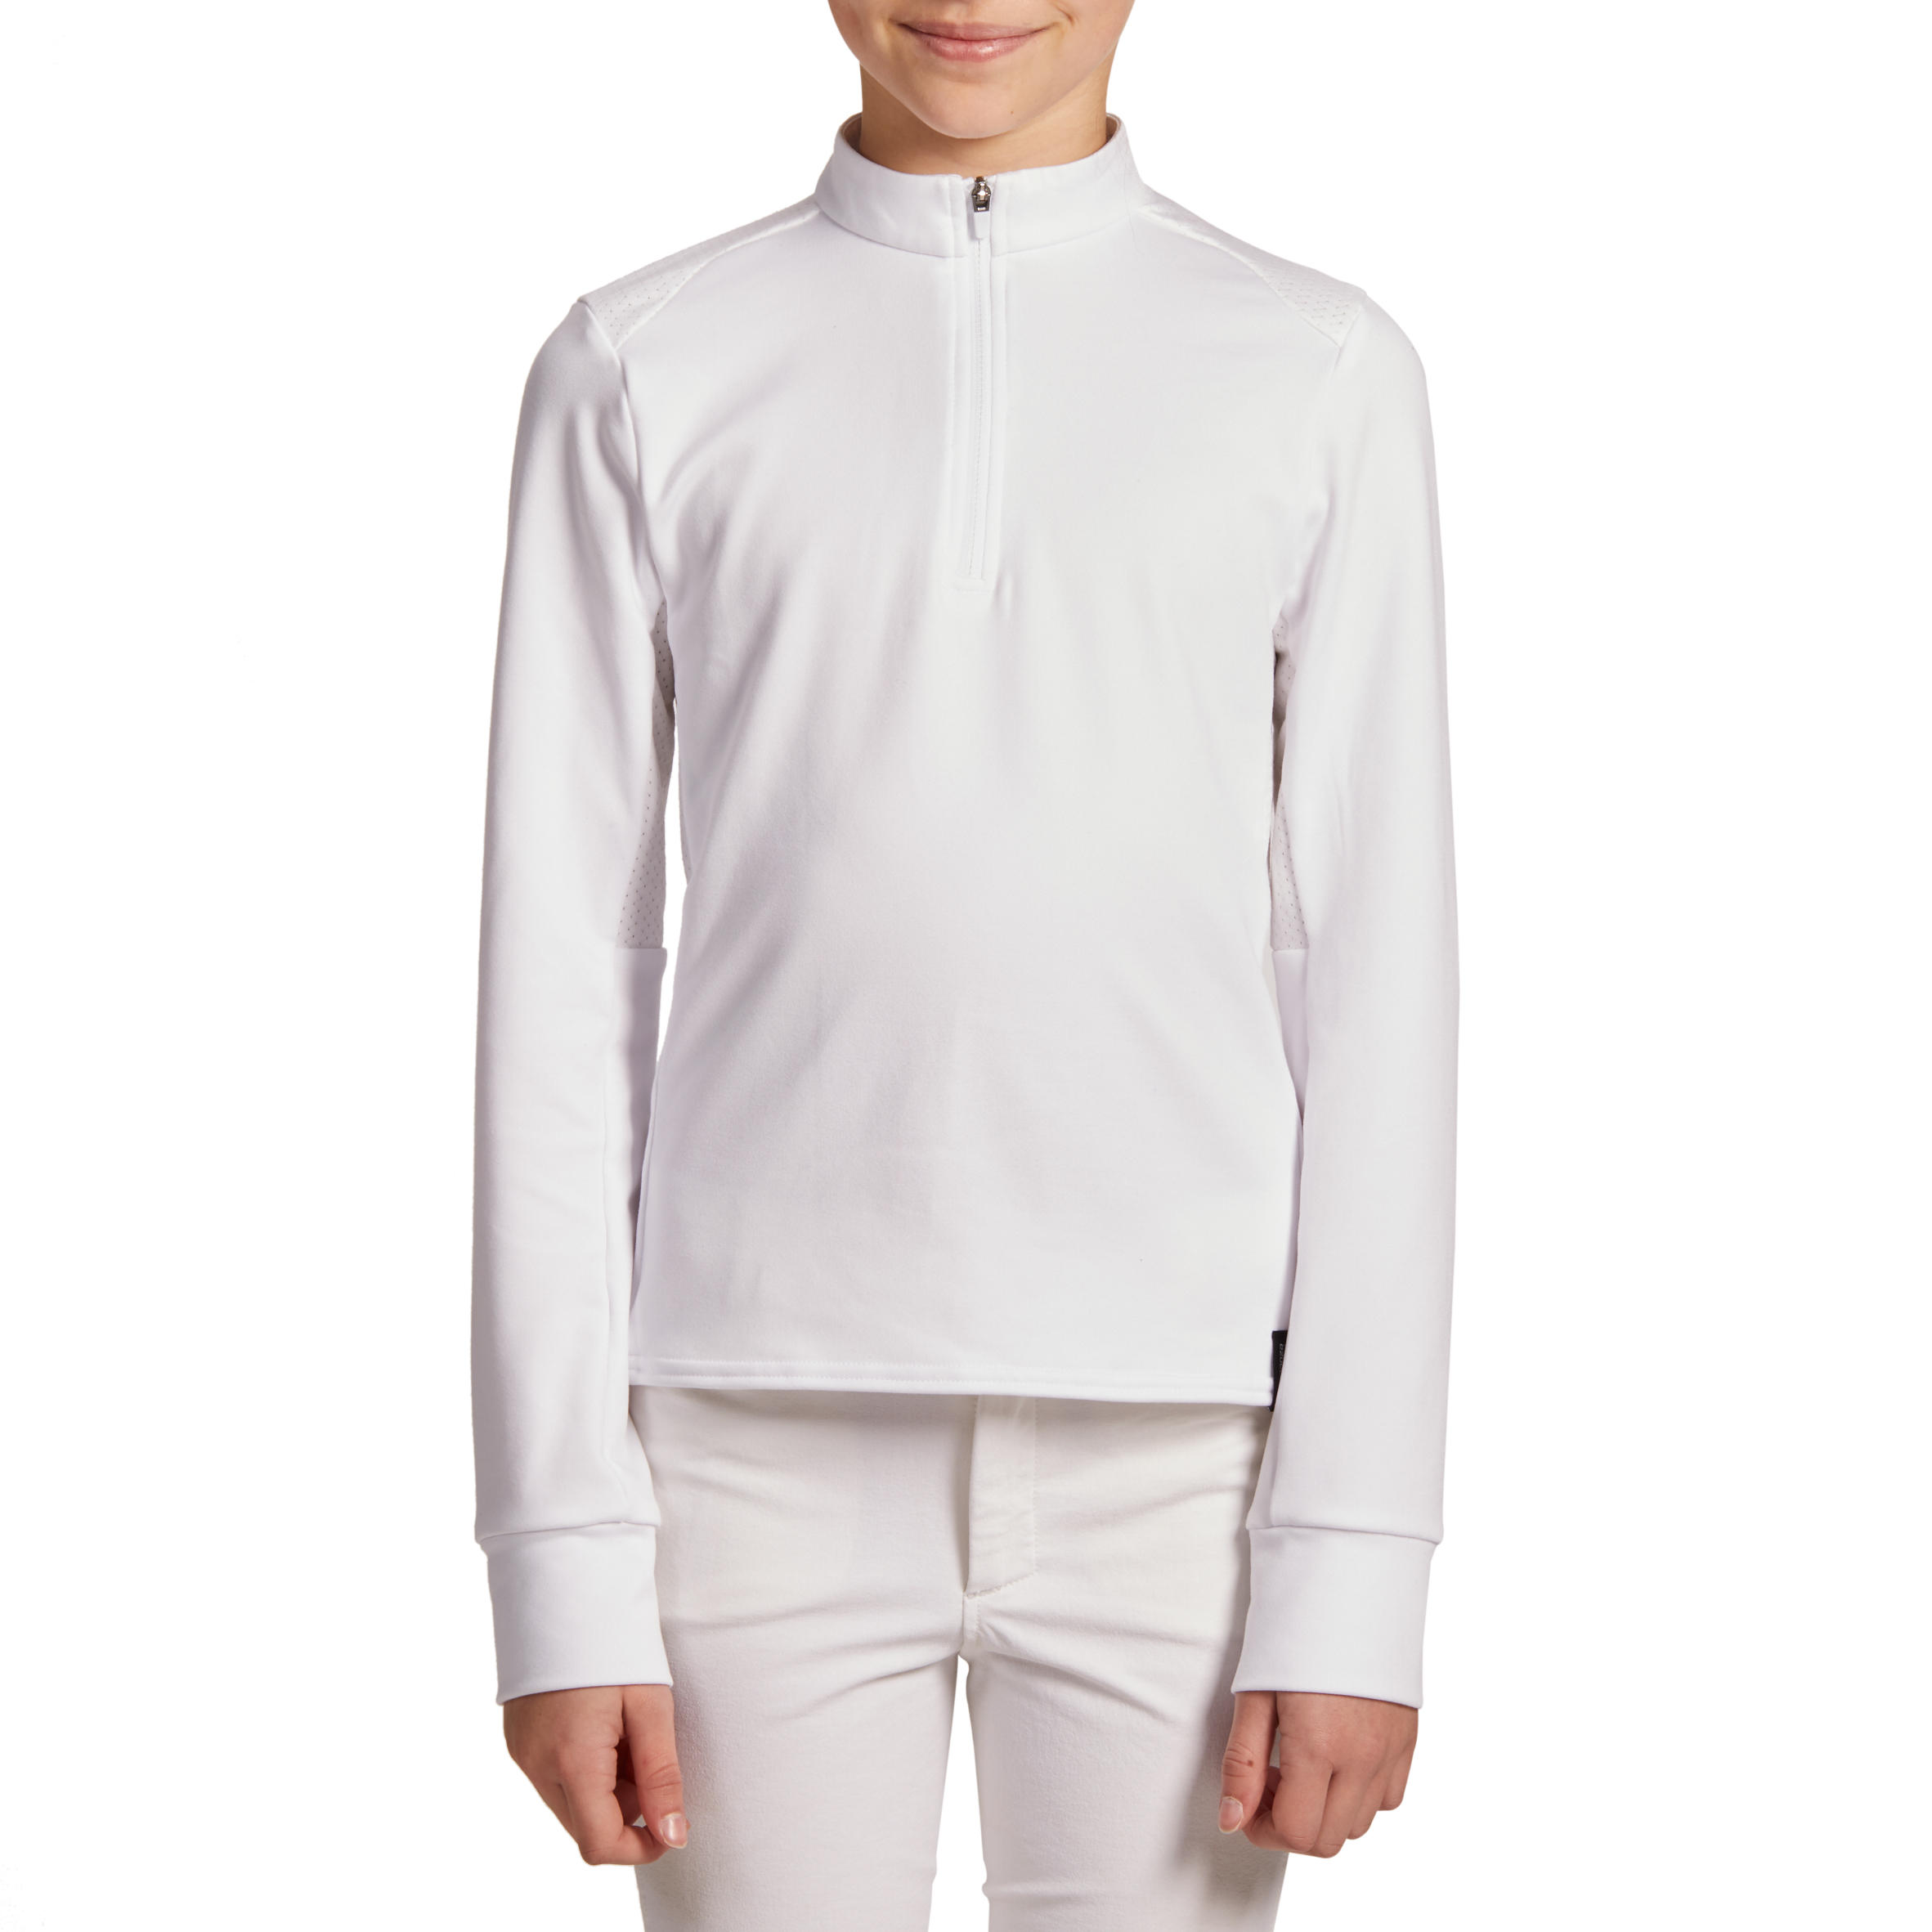 Kids' Horse Riding Long-Sleeved Warm Competition Polo 500 - White 2/9